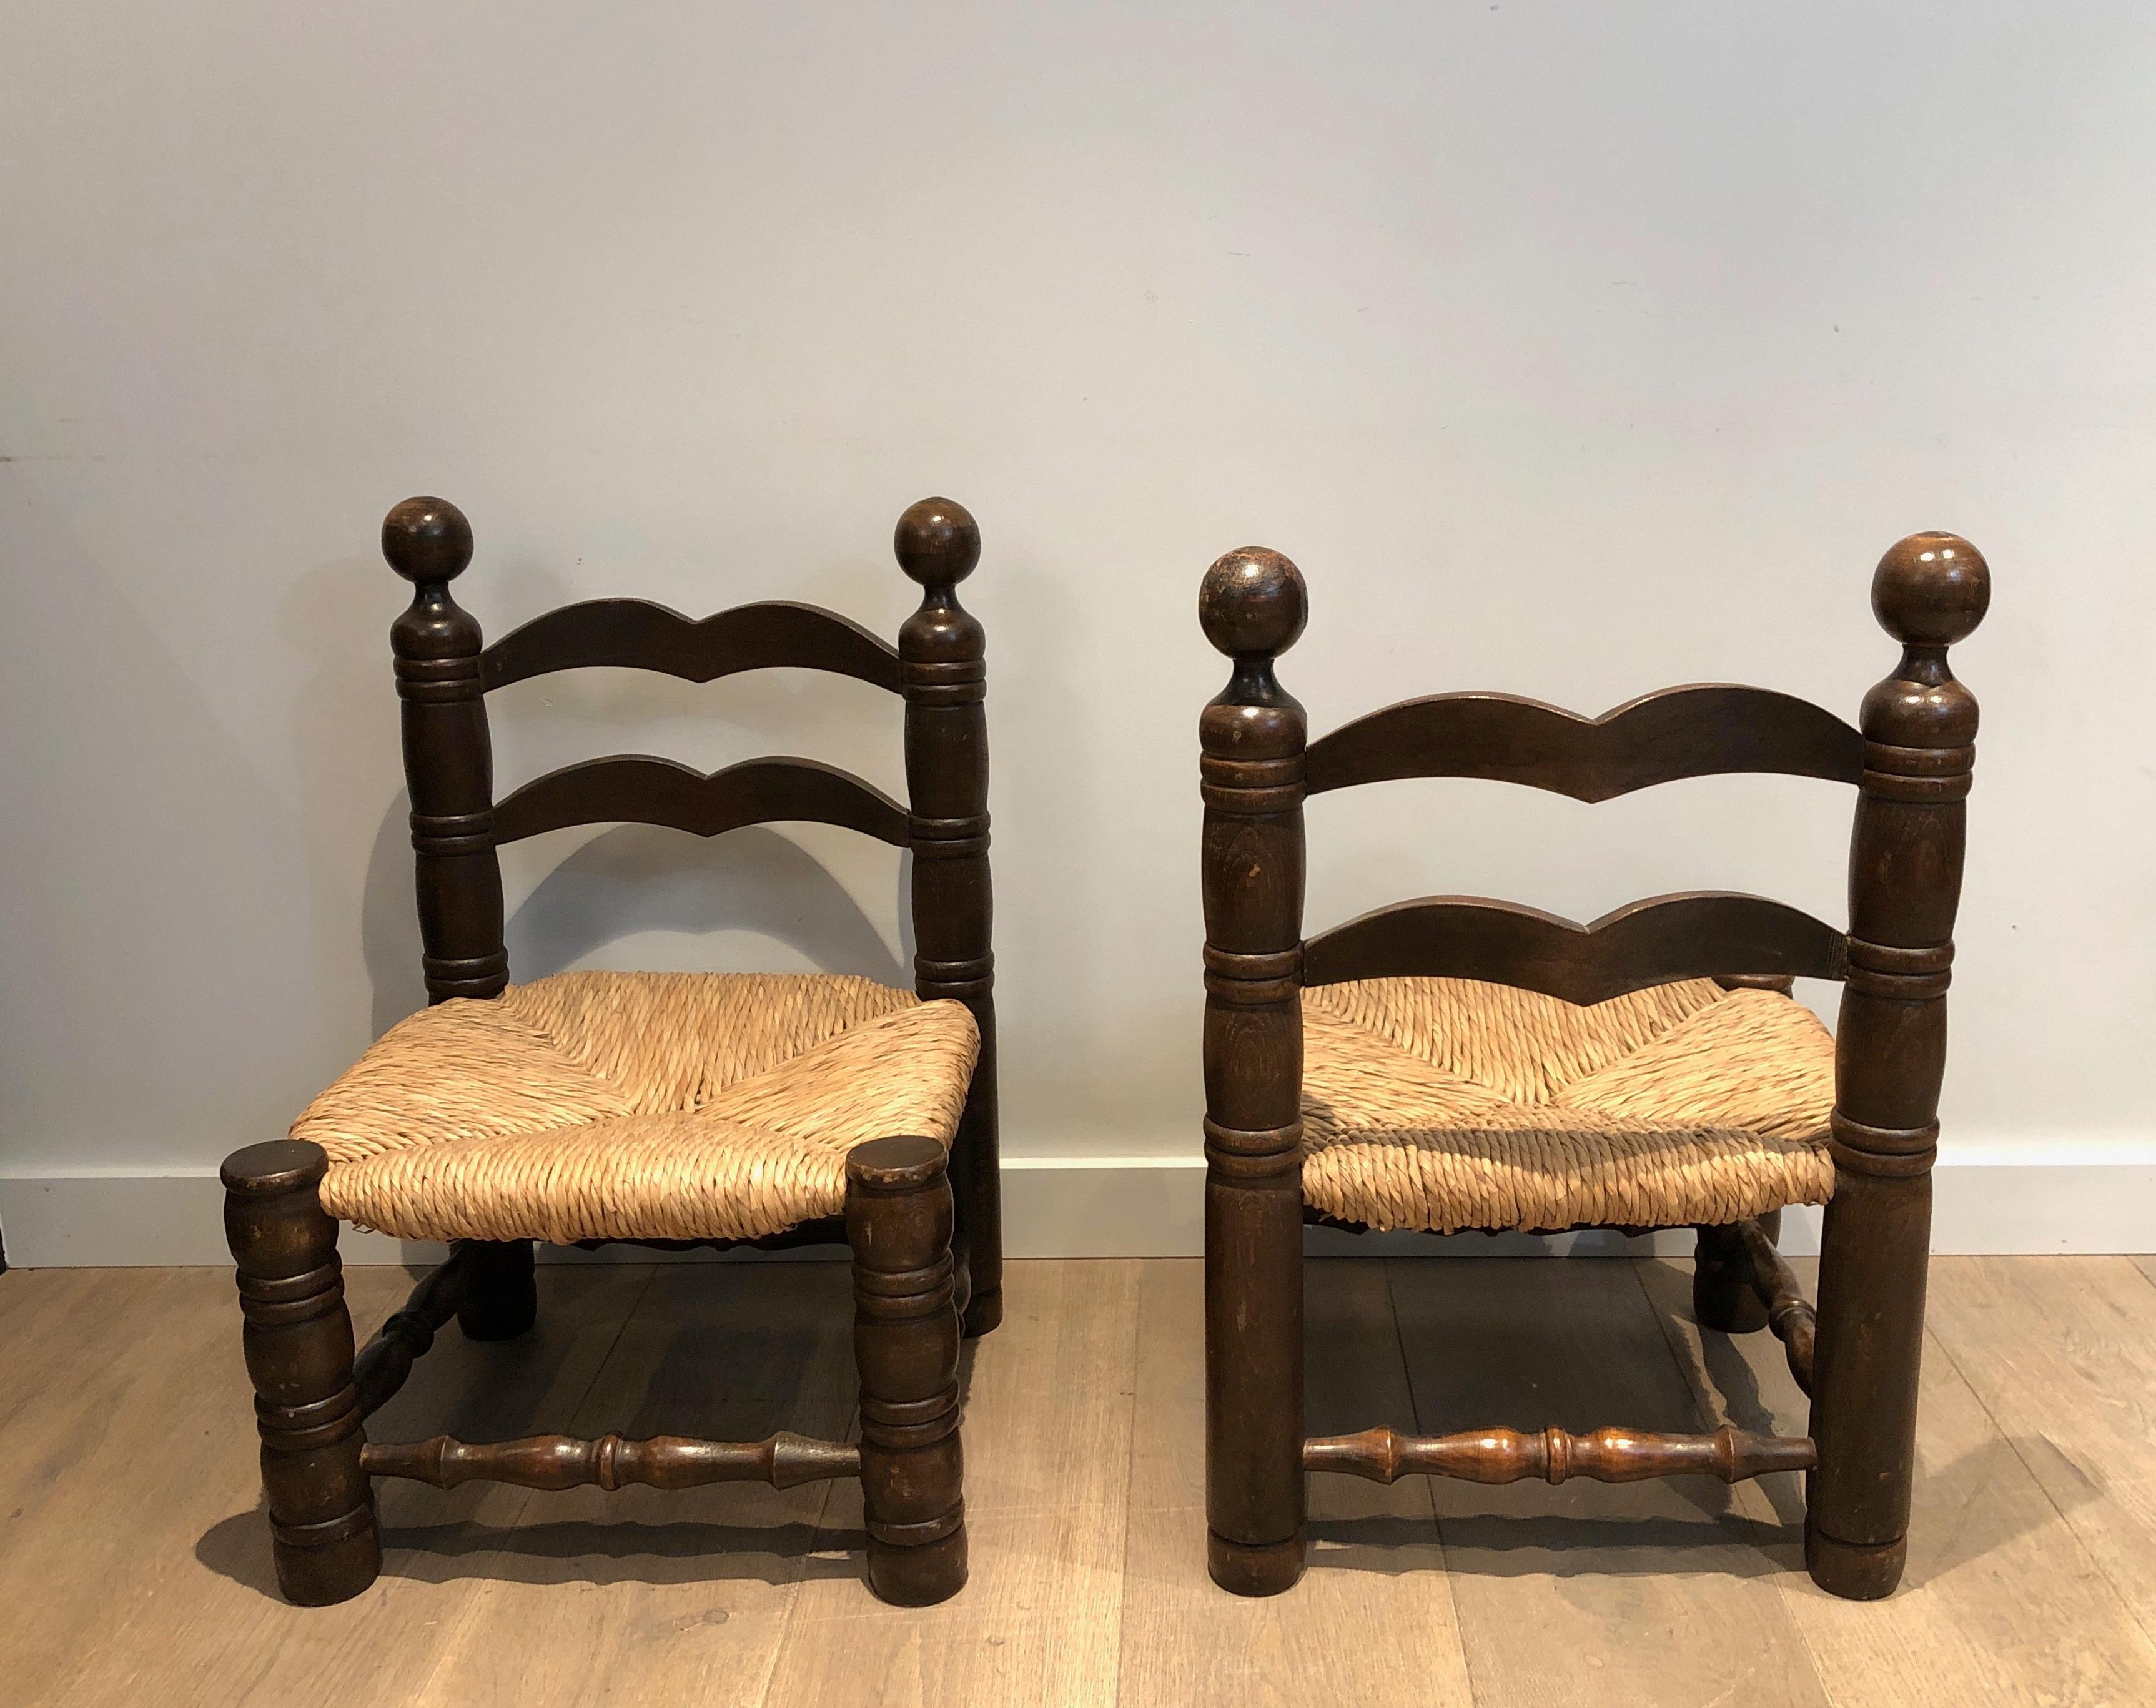 Early 20th Century Pair of Low Brutalist Chairs. French work by Charles Dudouyt. Circa 1920.